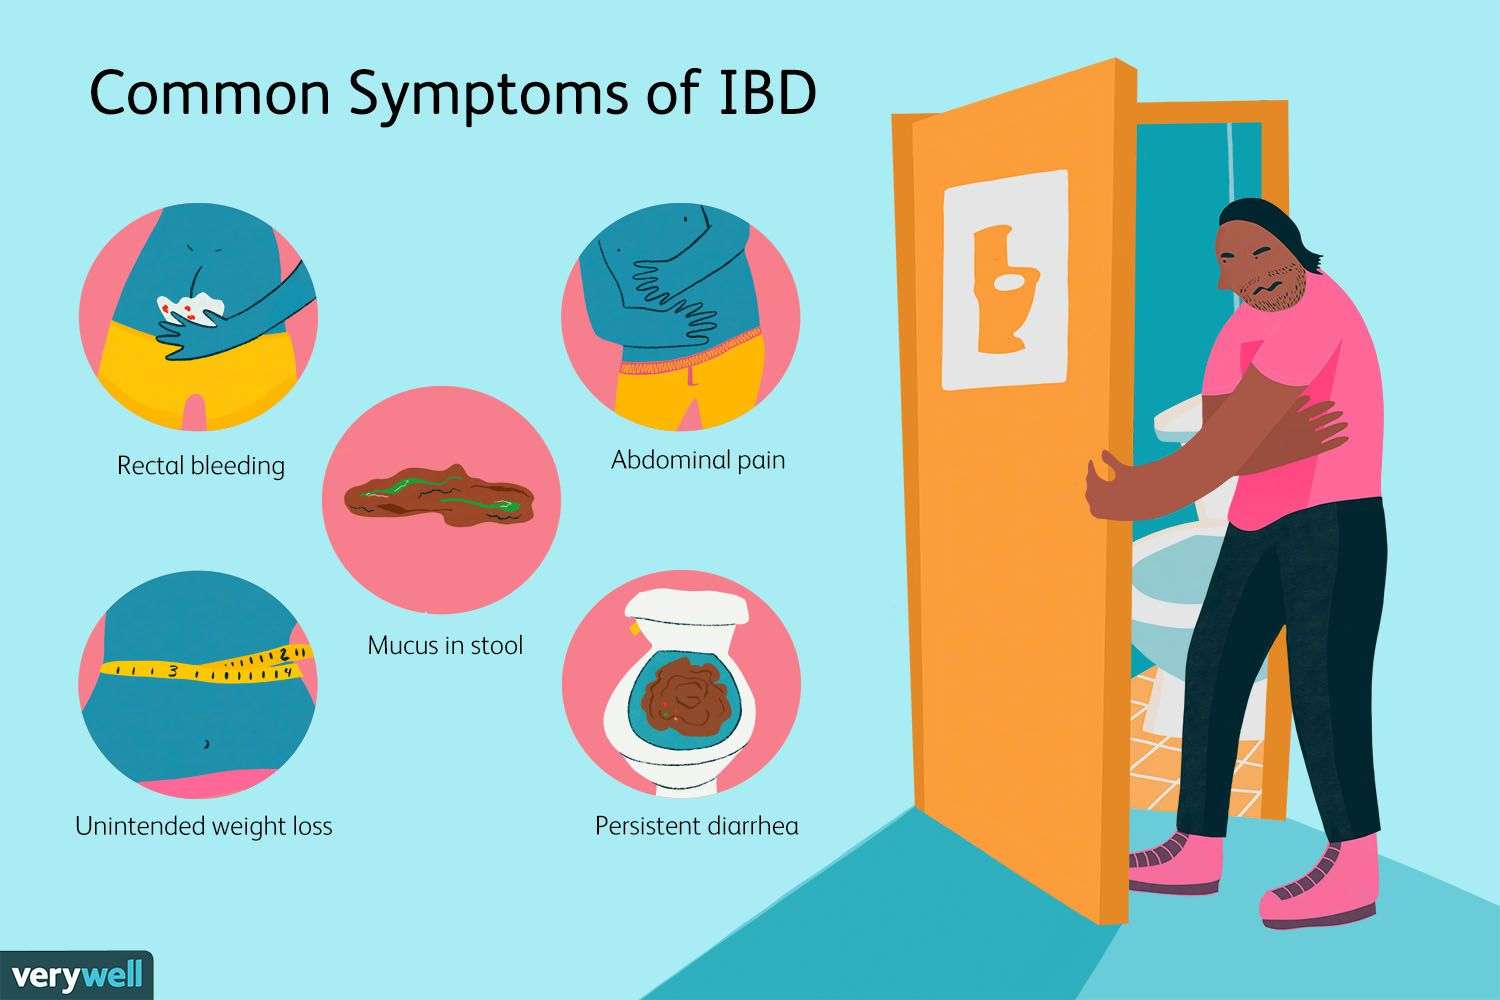 IBD: Signs, Symptoms, and Complications